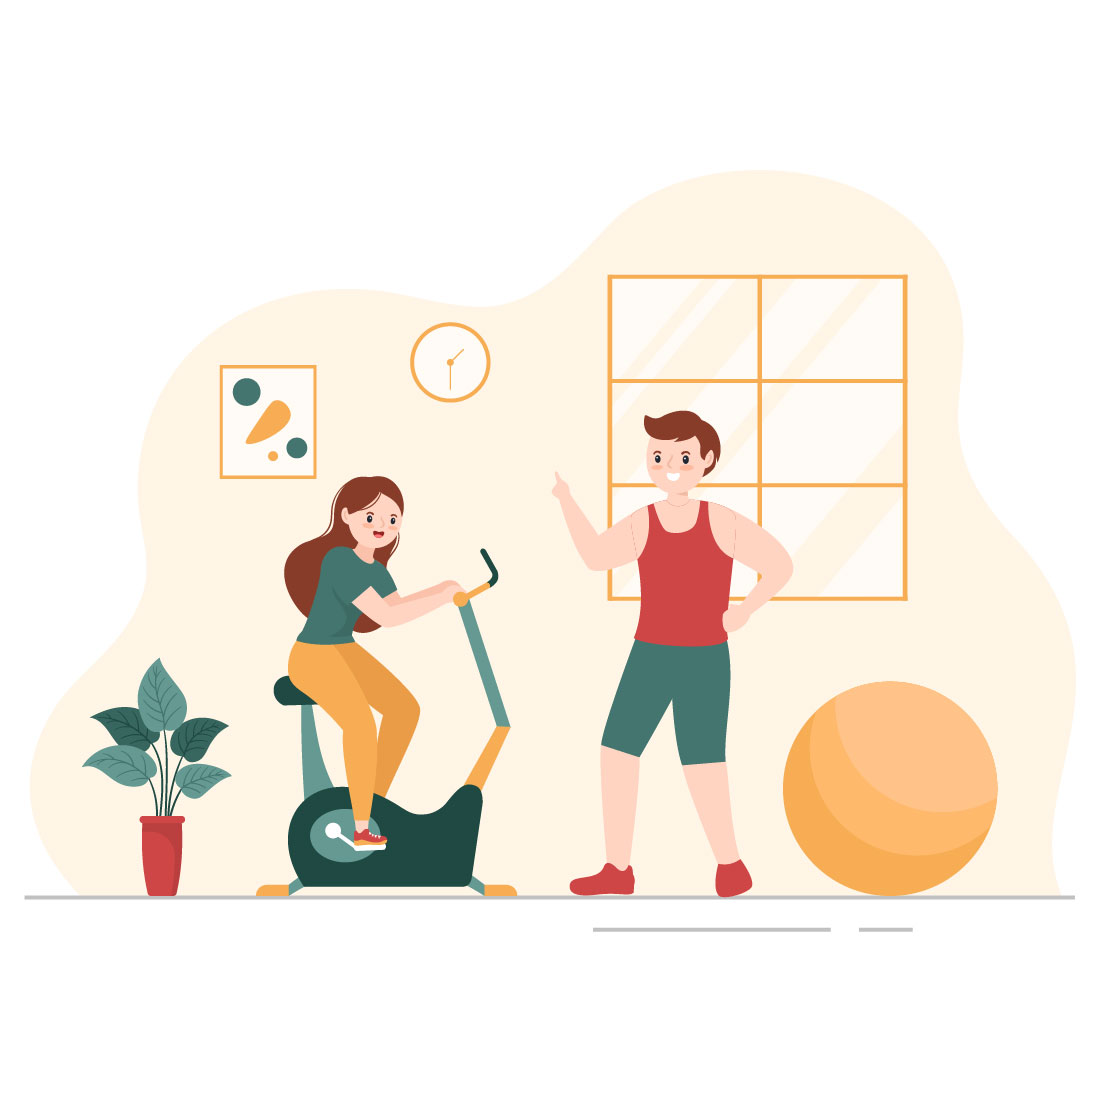 Personal Trainer or Sports Cartoon Instructor Illustration cover image.